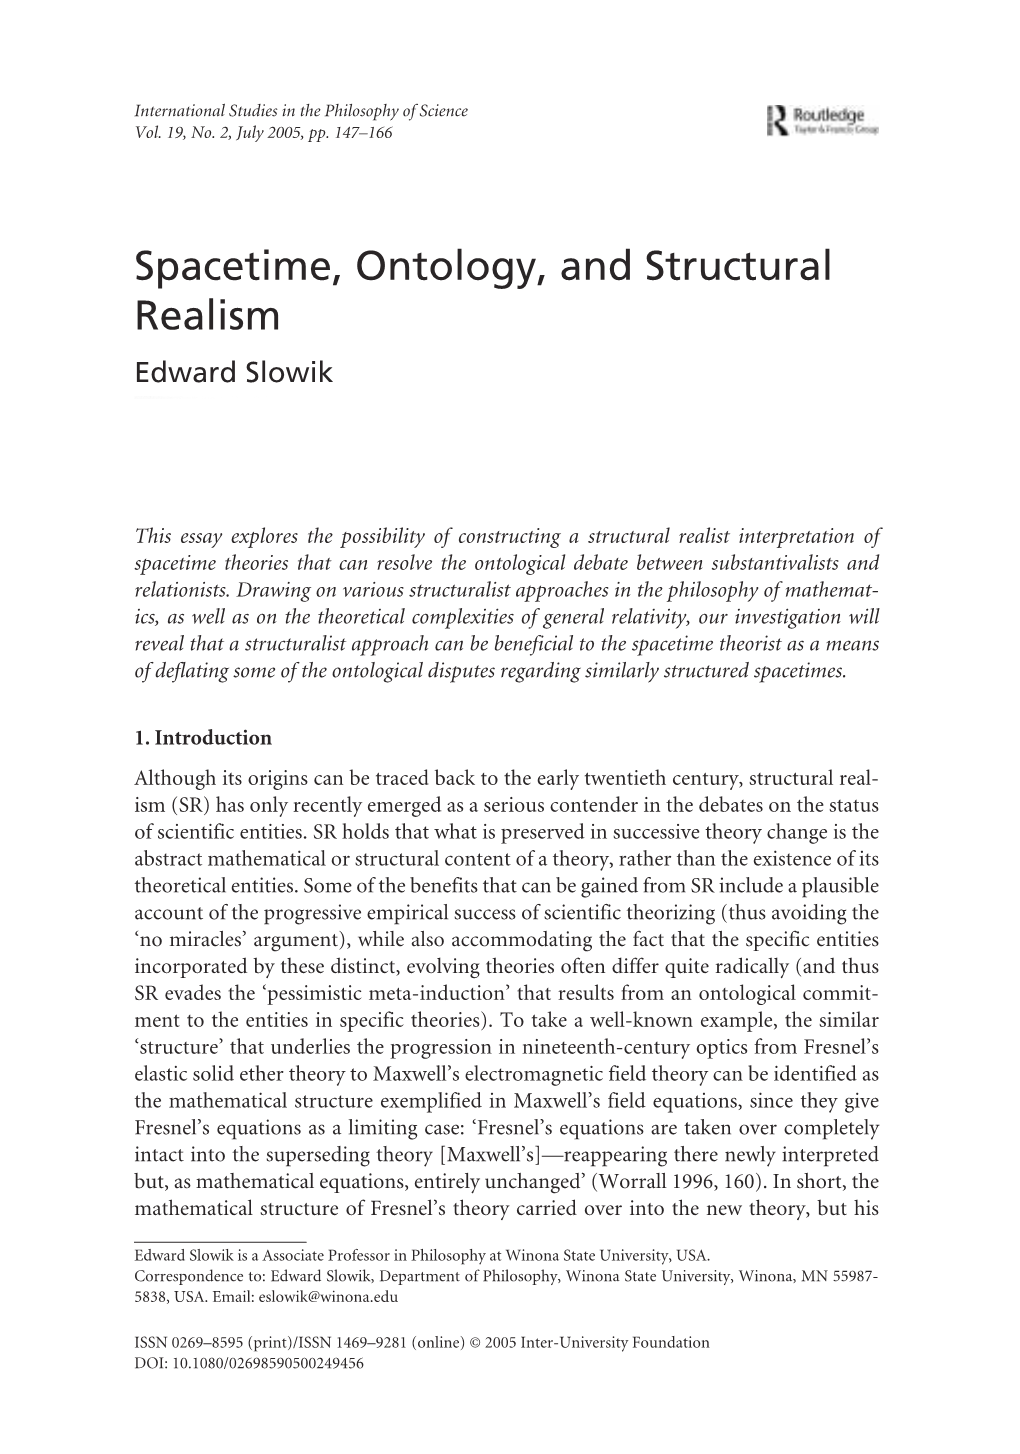 Spacetime, Ontology, and Structural Realism Edward Slowik